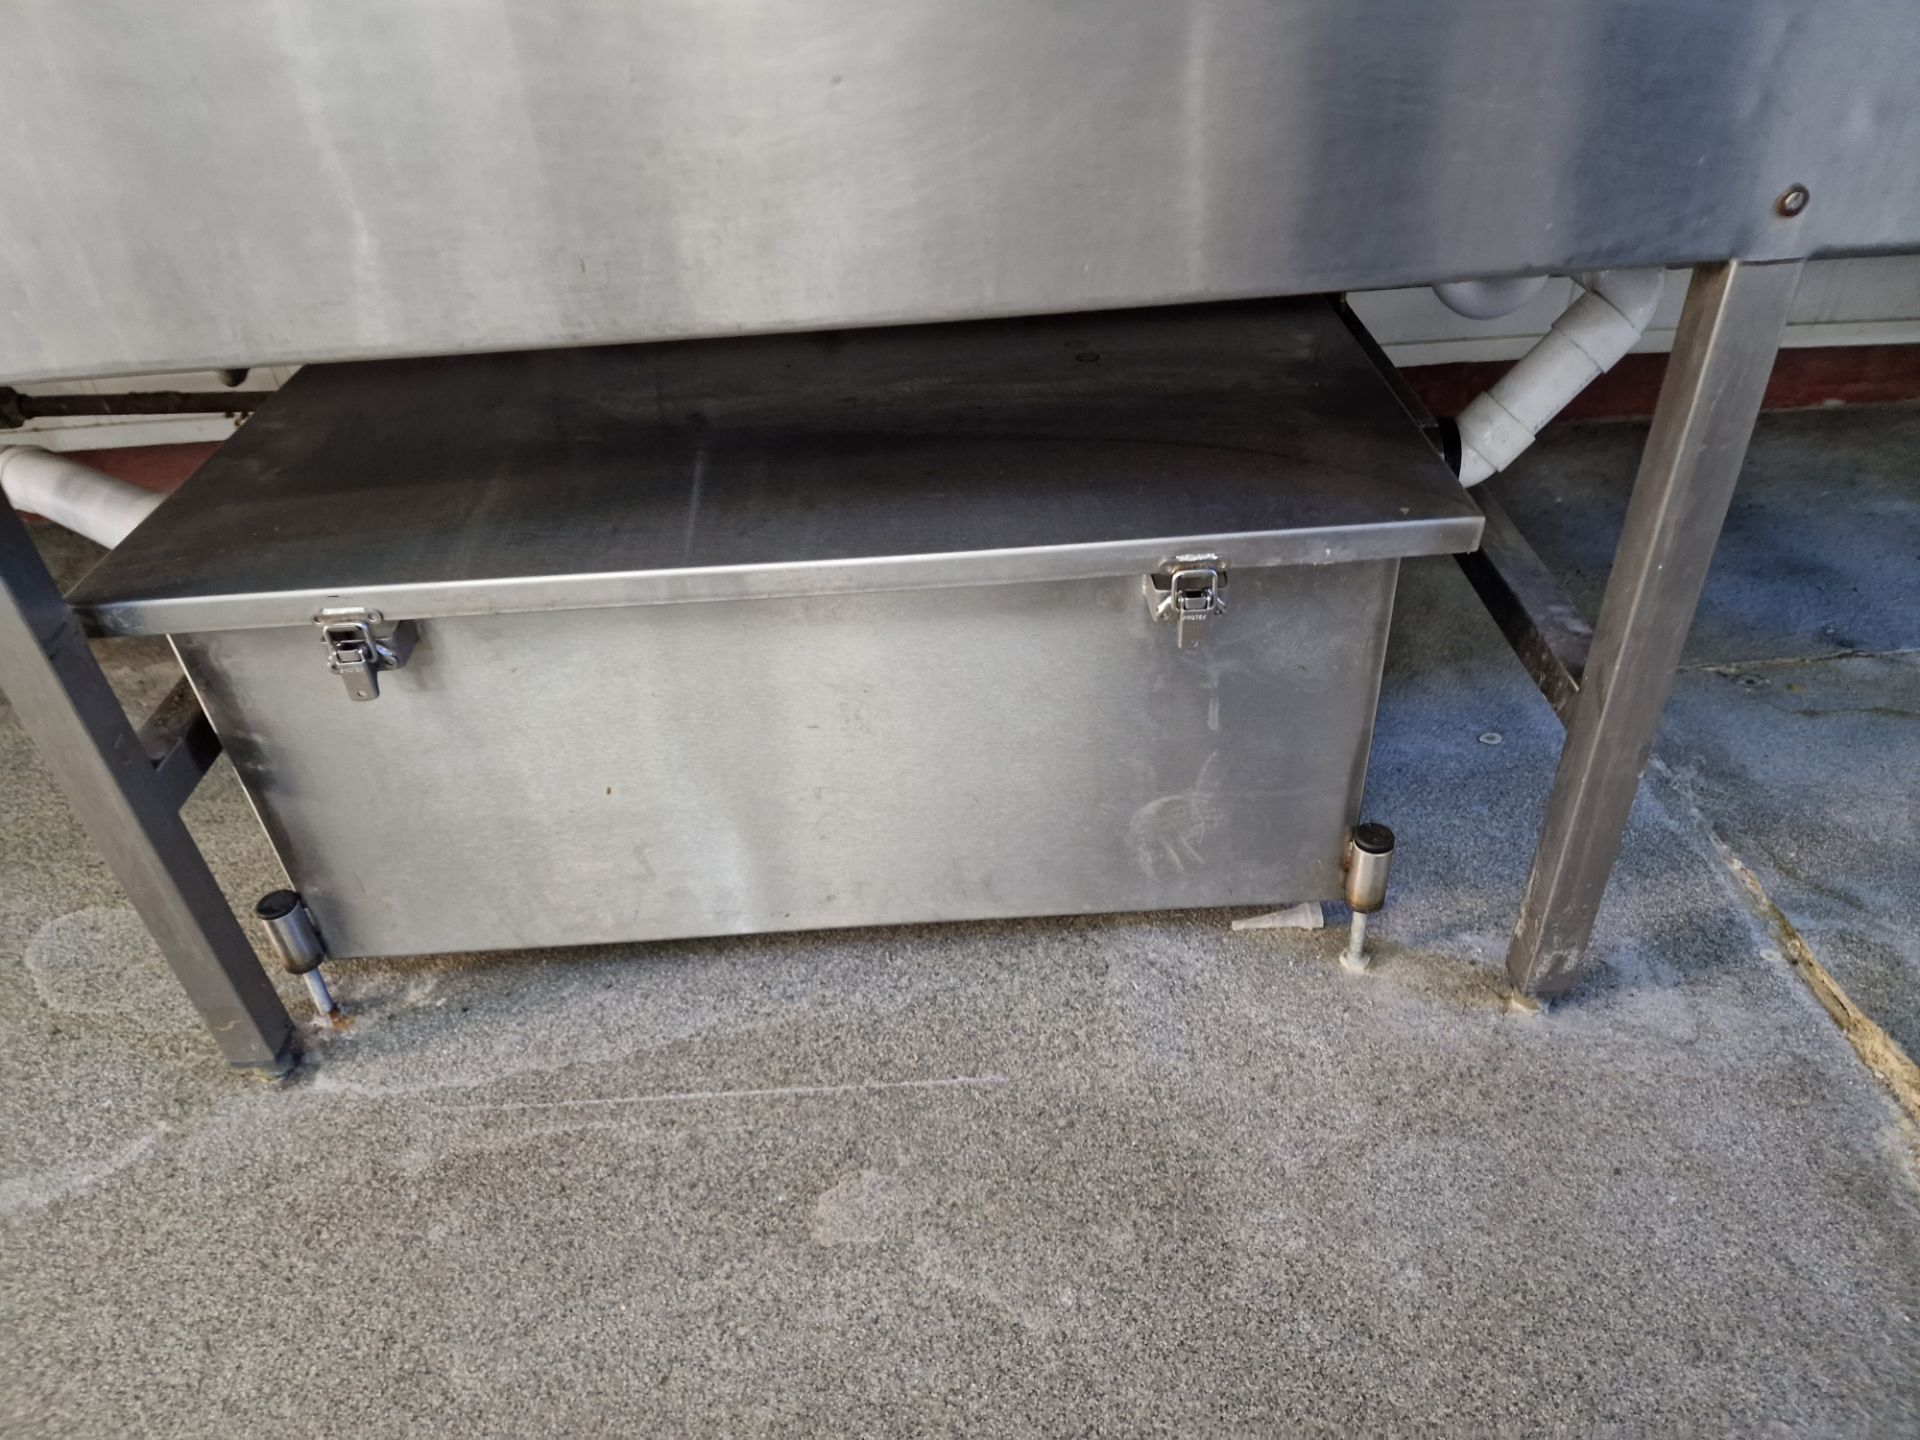 Stainless Steel Commercial Triple Bowl Sink Right Hand Drainer With Grease Trap Unit And Tap Faucets - Bild 2 aus 2